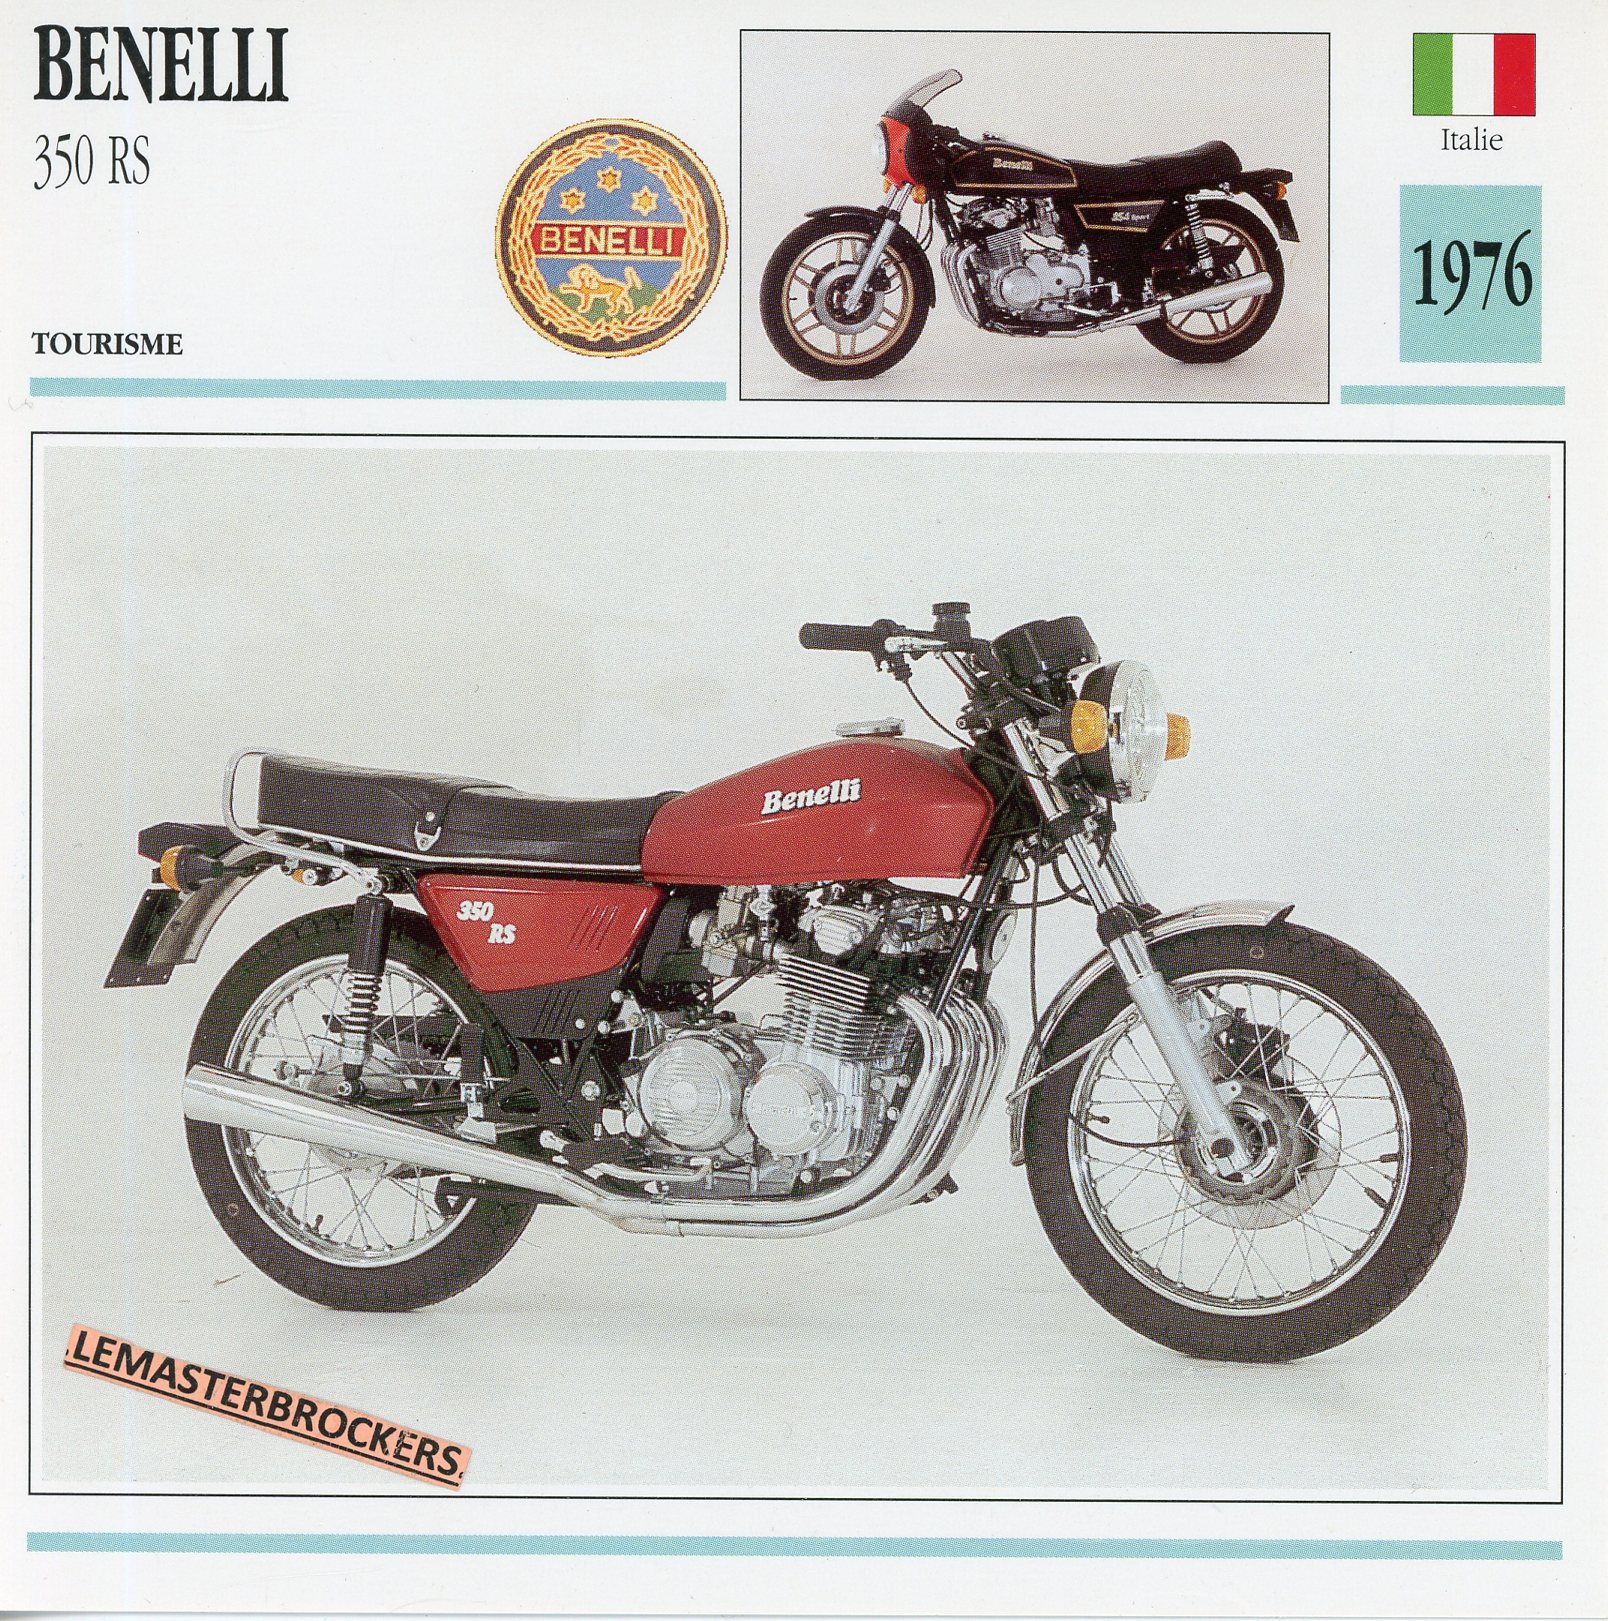 BENELLI-350-RS-350RS-1976-LEMASTERBROCKERS-FICHE-MOTO-ATLAS-CARD